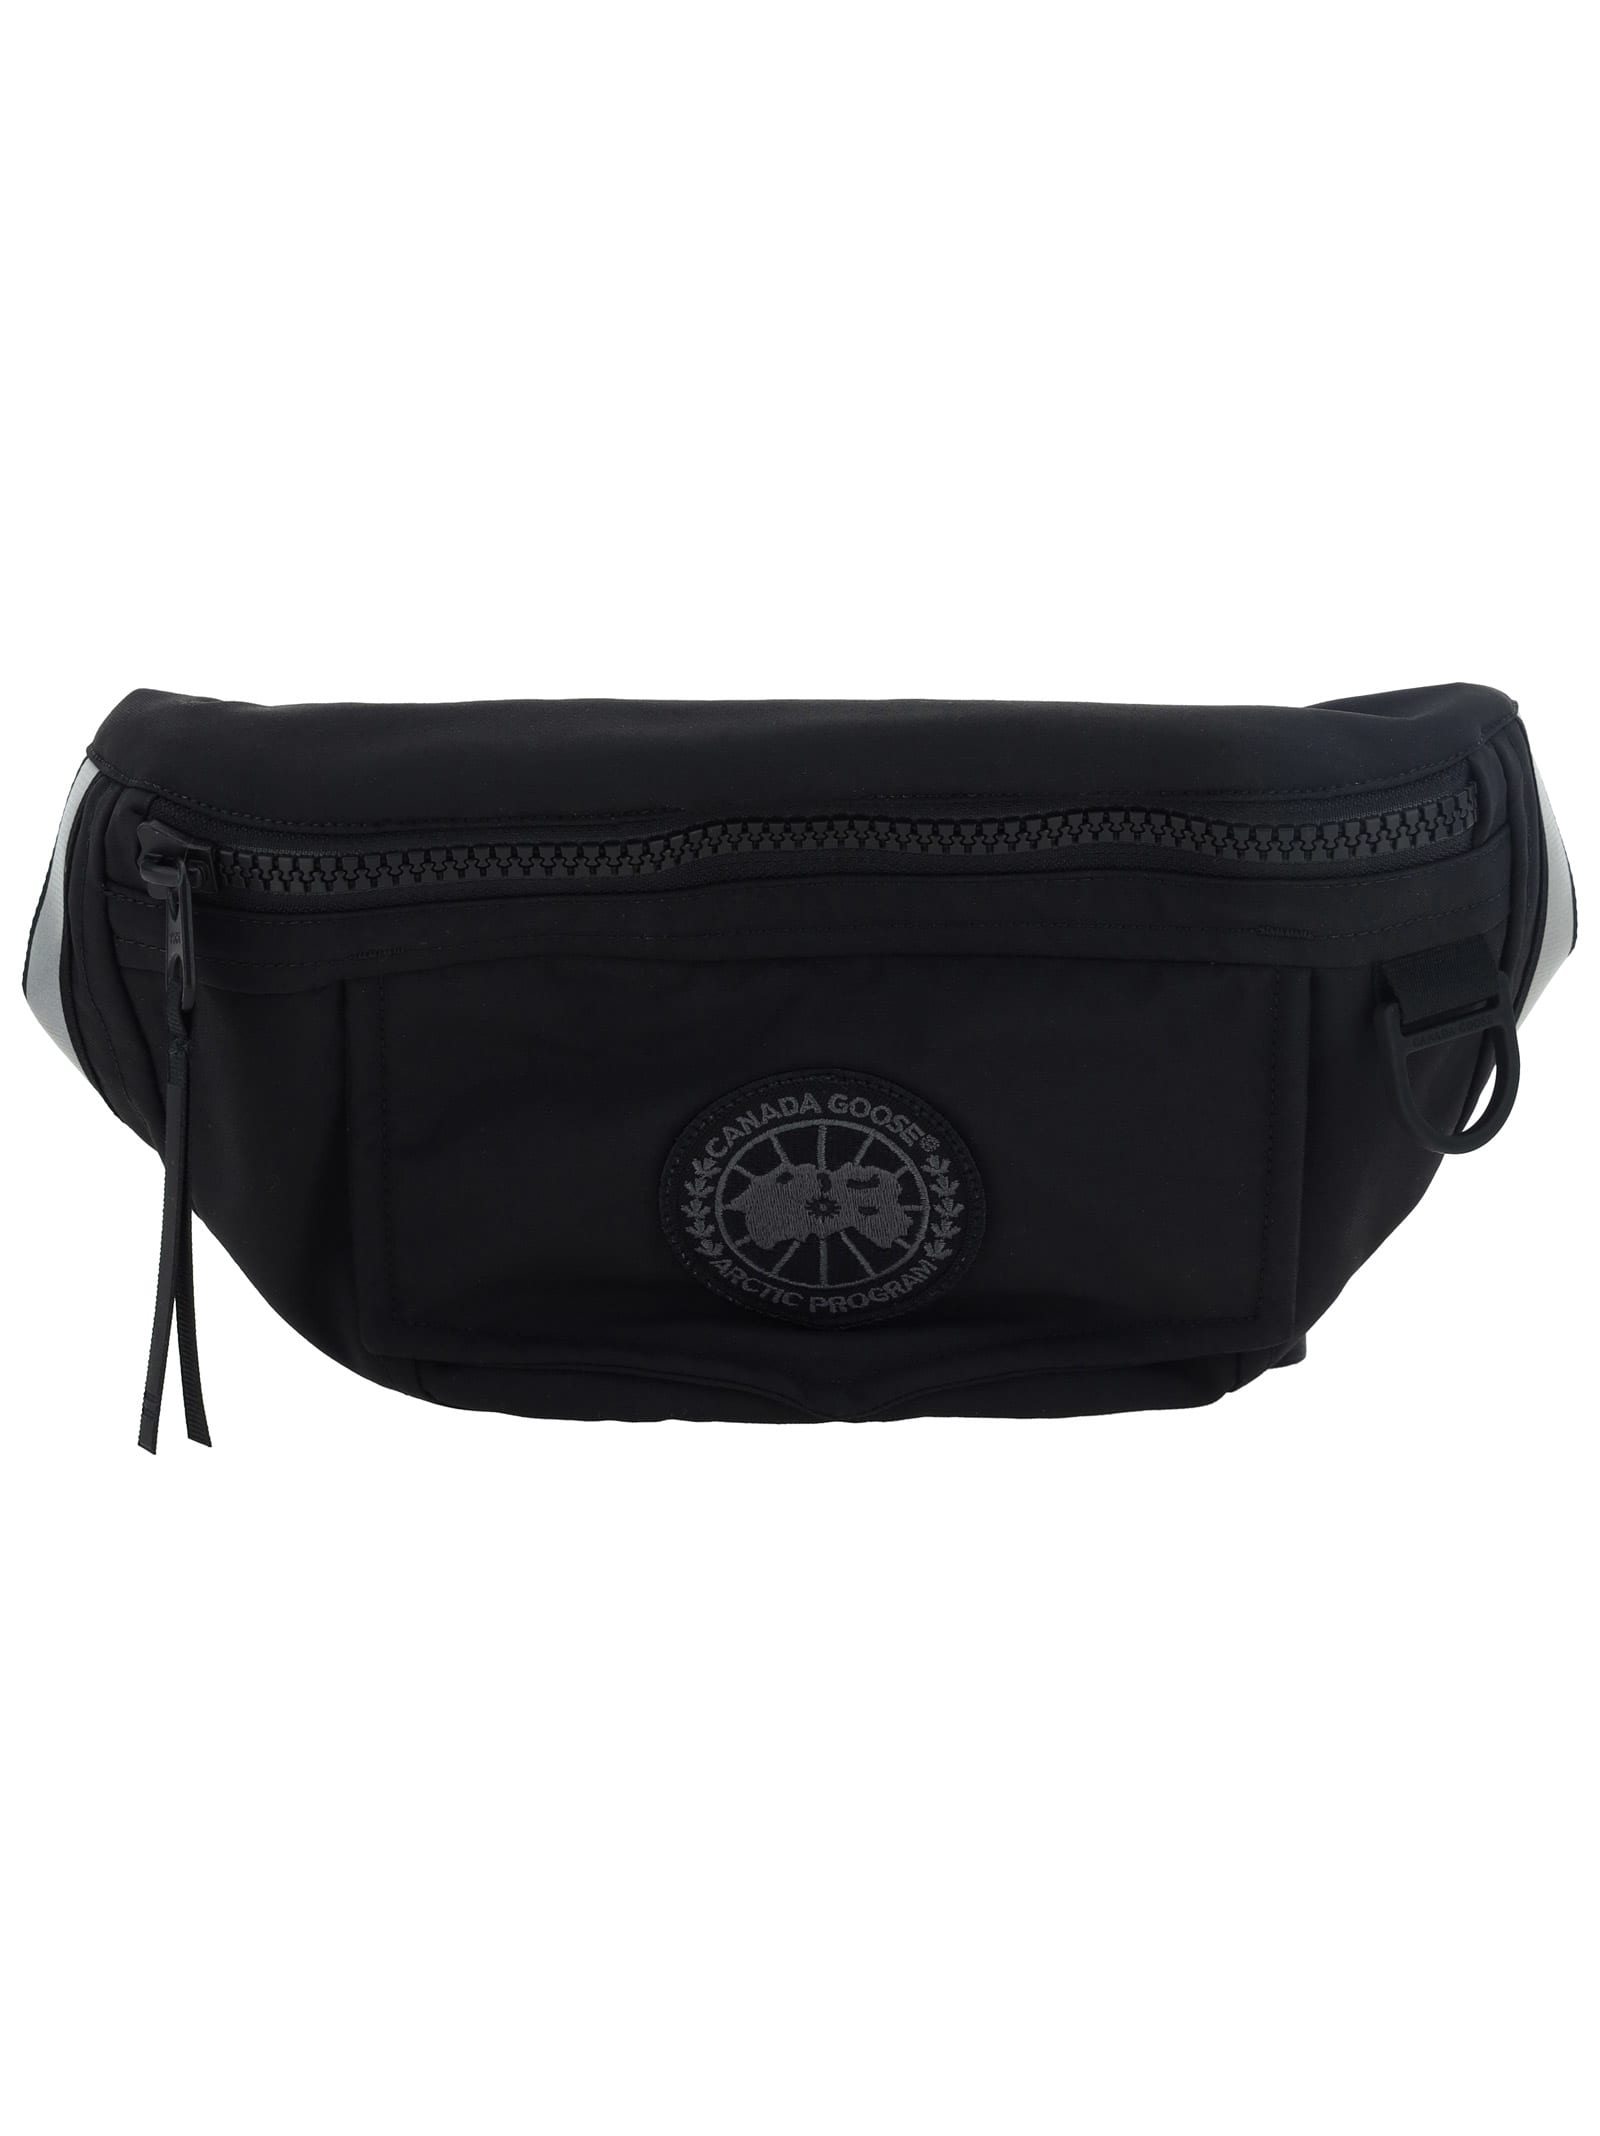 Canada Goose Fanny Pack